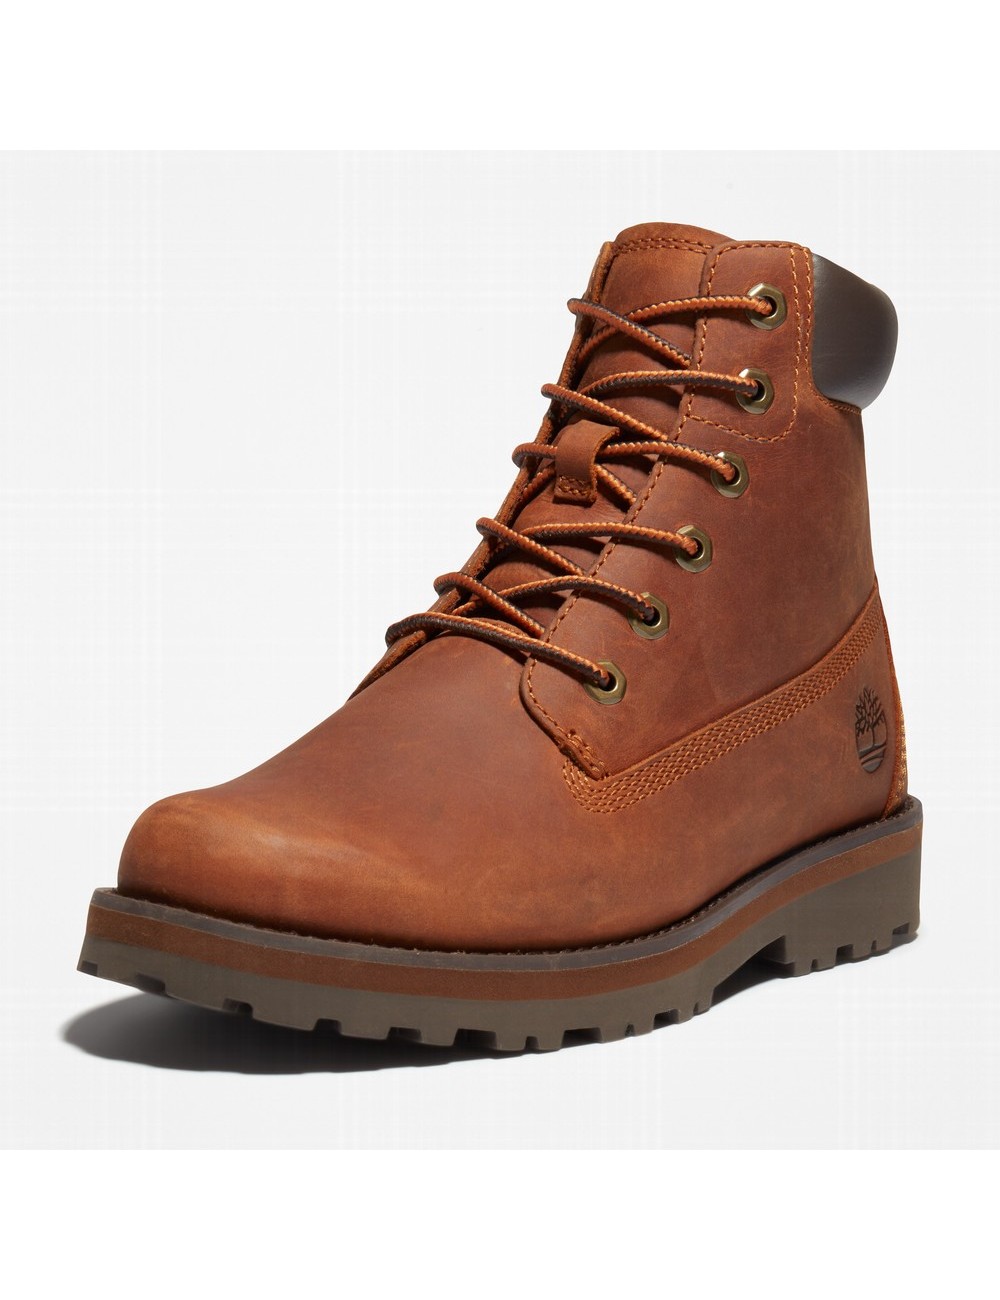 BOTA TIMBERLAND  COURMA KID TRADITIONAL 6IN GLAZED GINGER